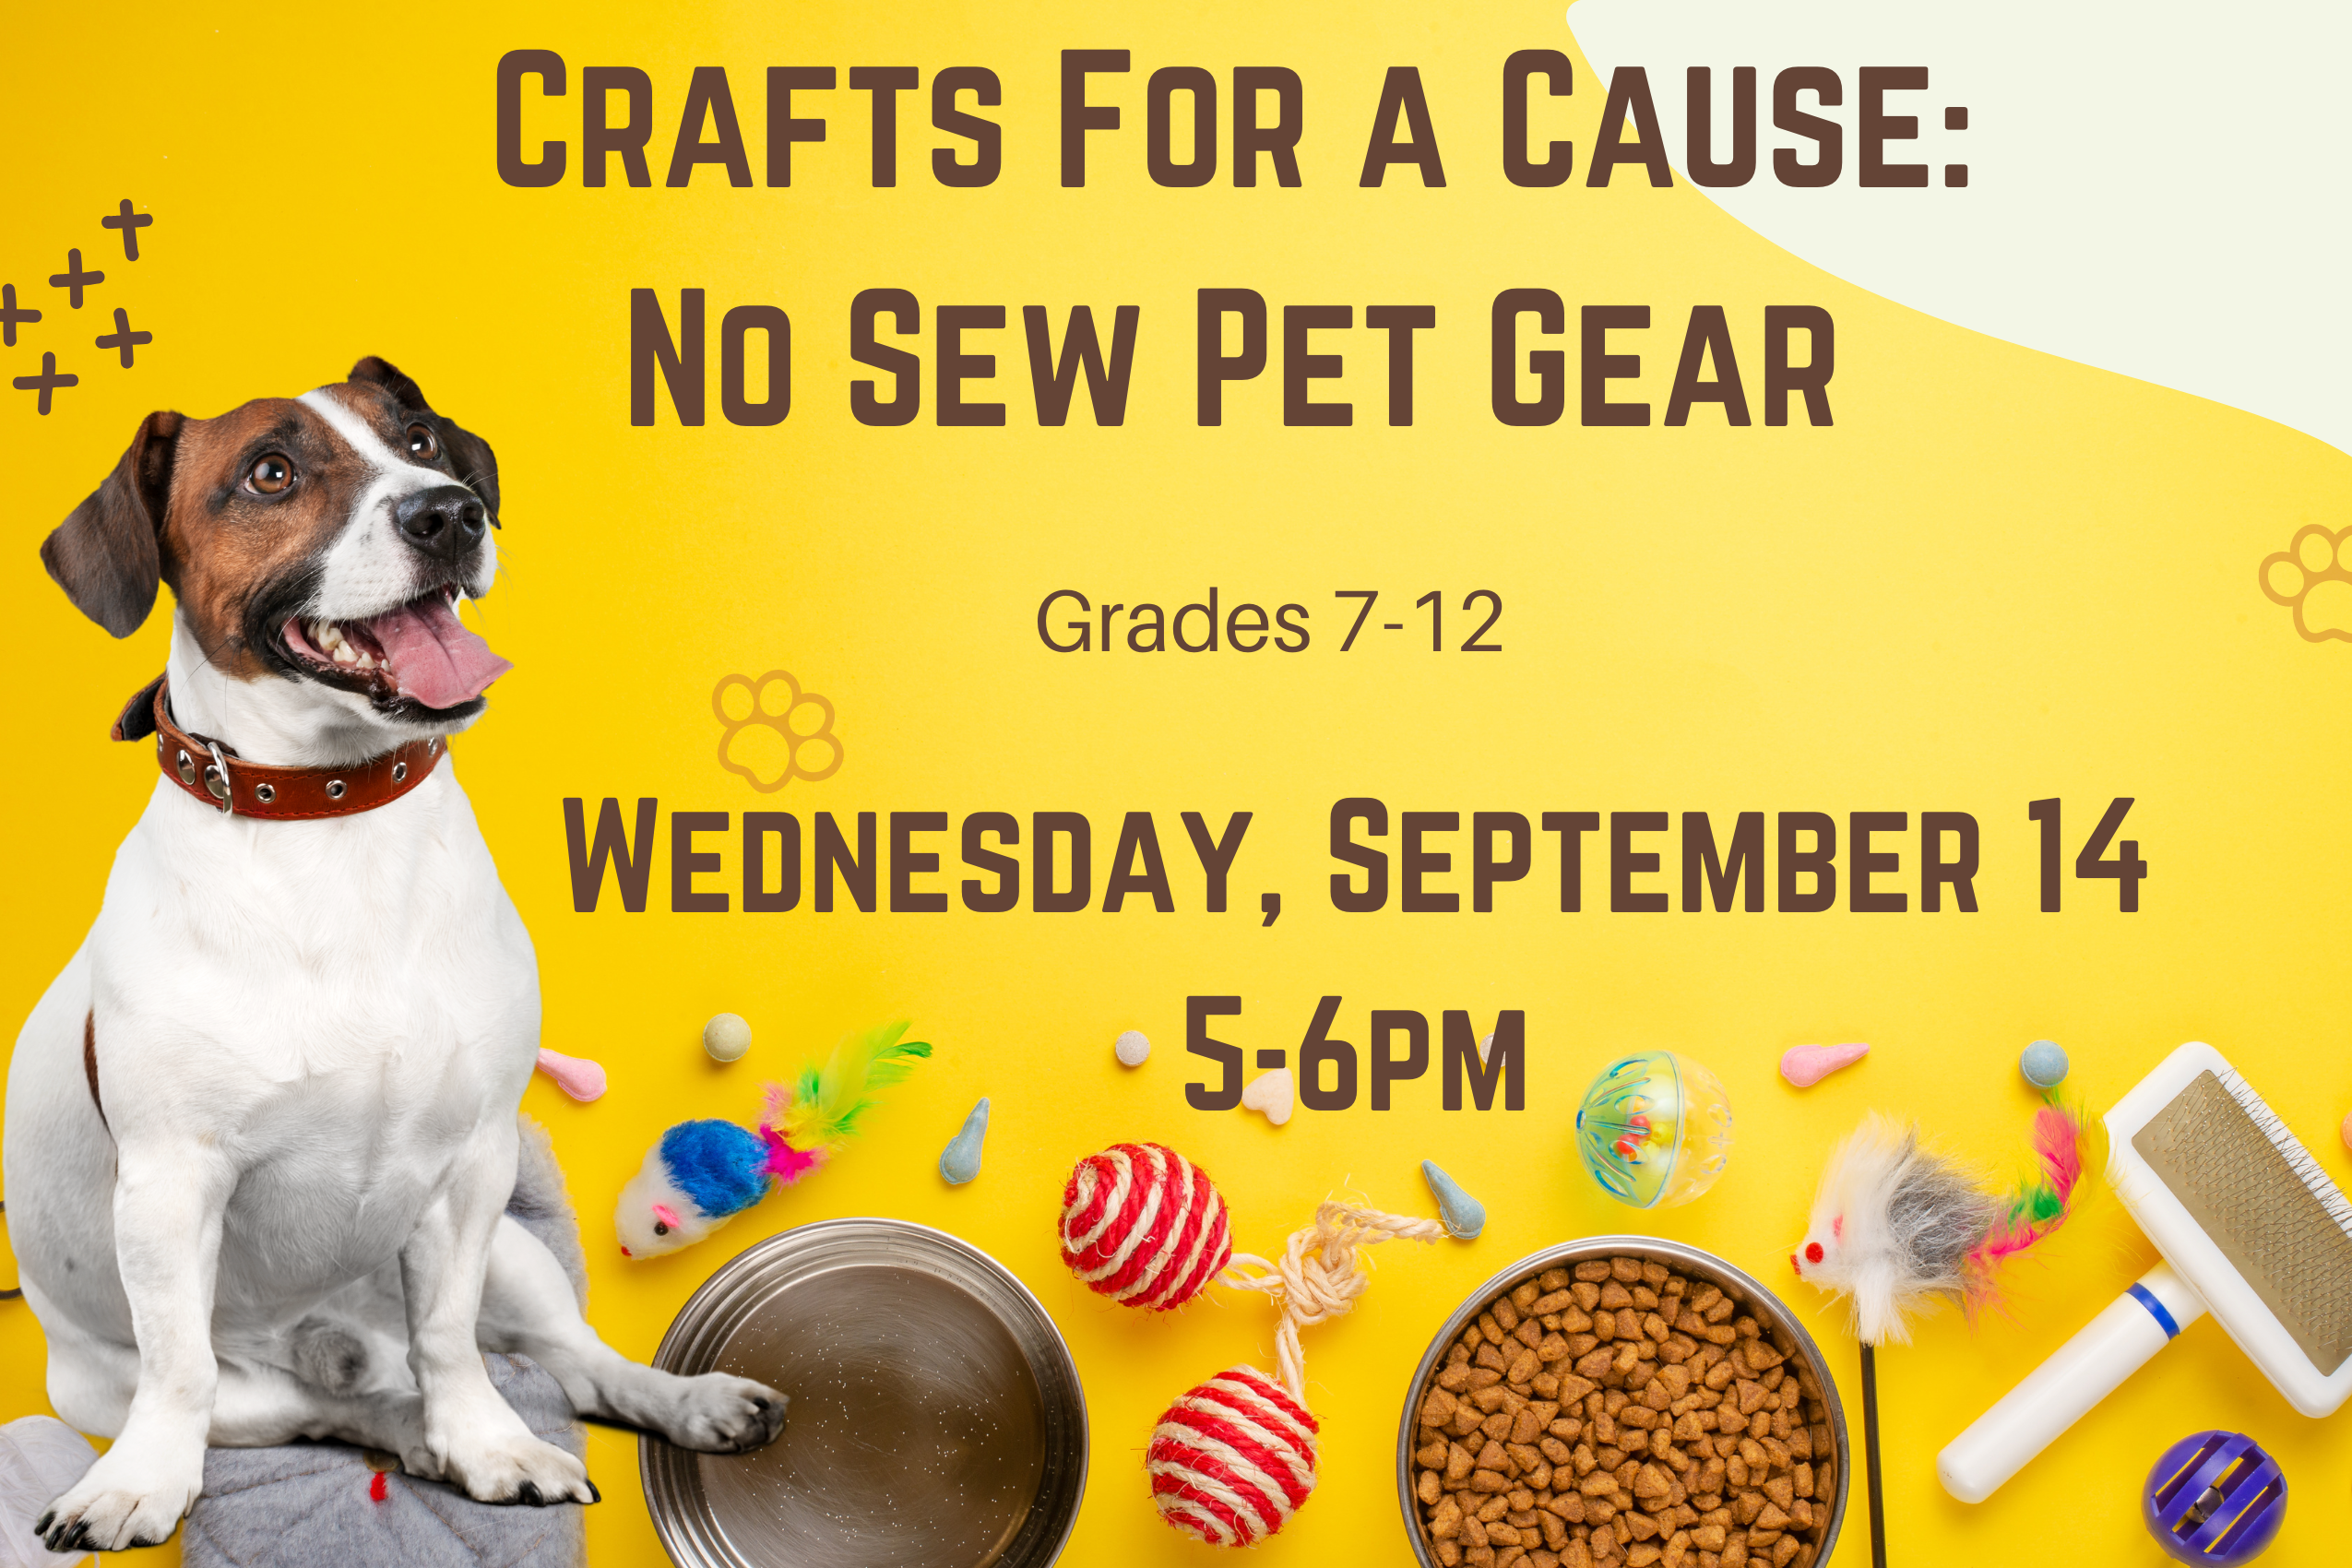 Program flyer with the following text, "Crafts for a Cause: No Sew Pet Gear. Grades 7-12. Wednesday, September 14. 5:00-6:00pm."